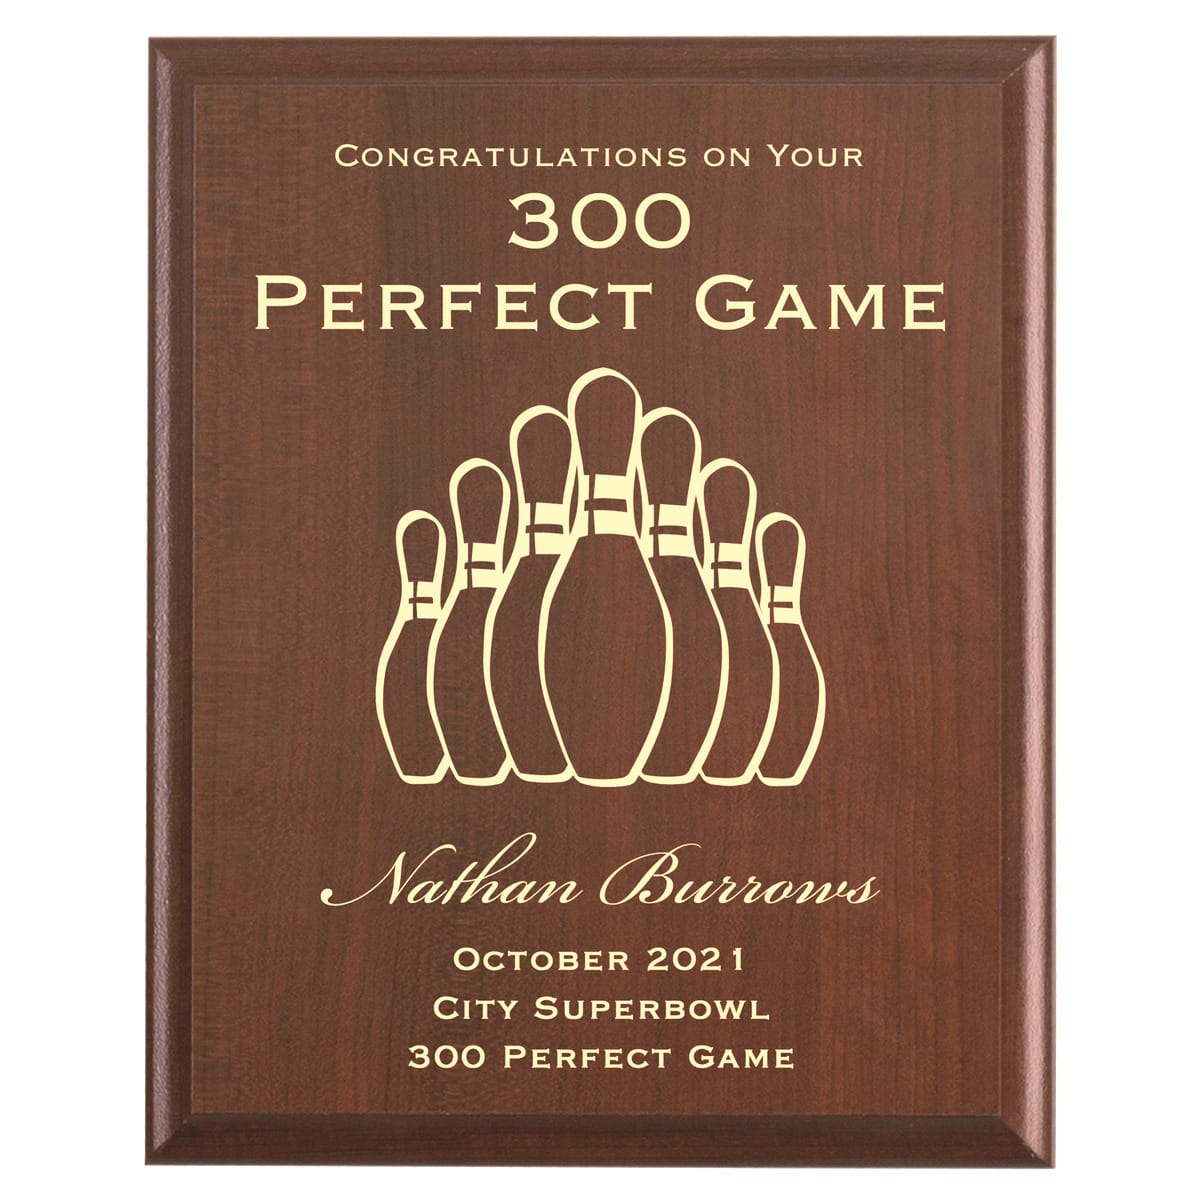 Plaque photo: Perfect Game Bowling Award design with free personalization. Wood style finish with customized text.